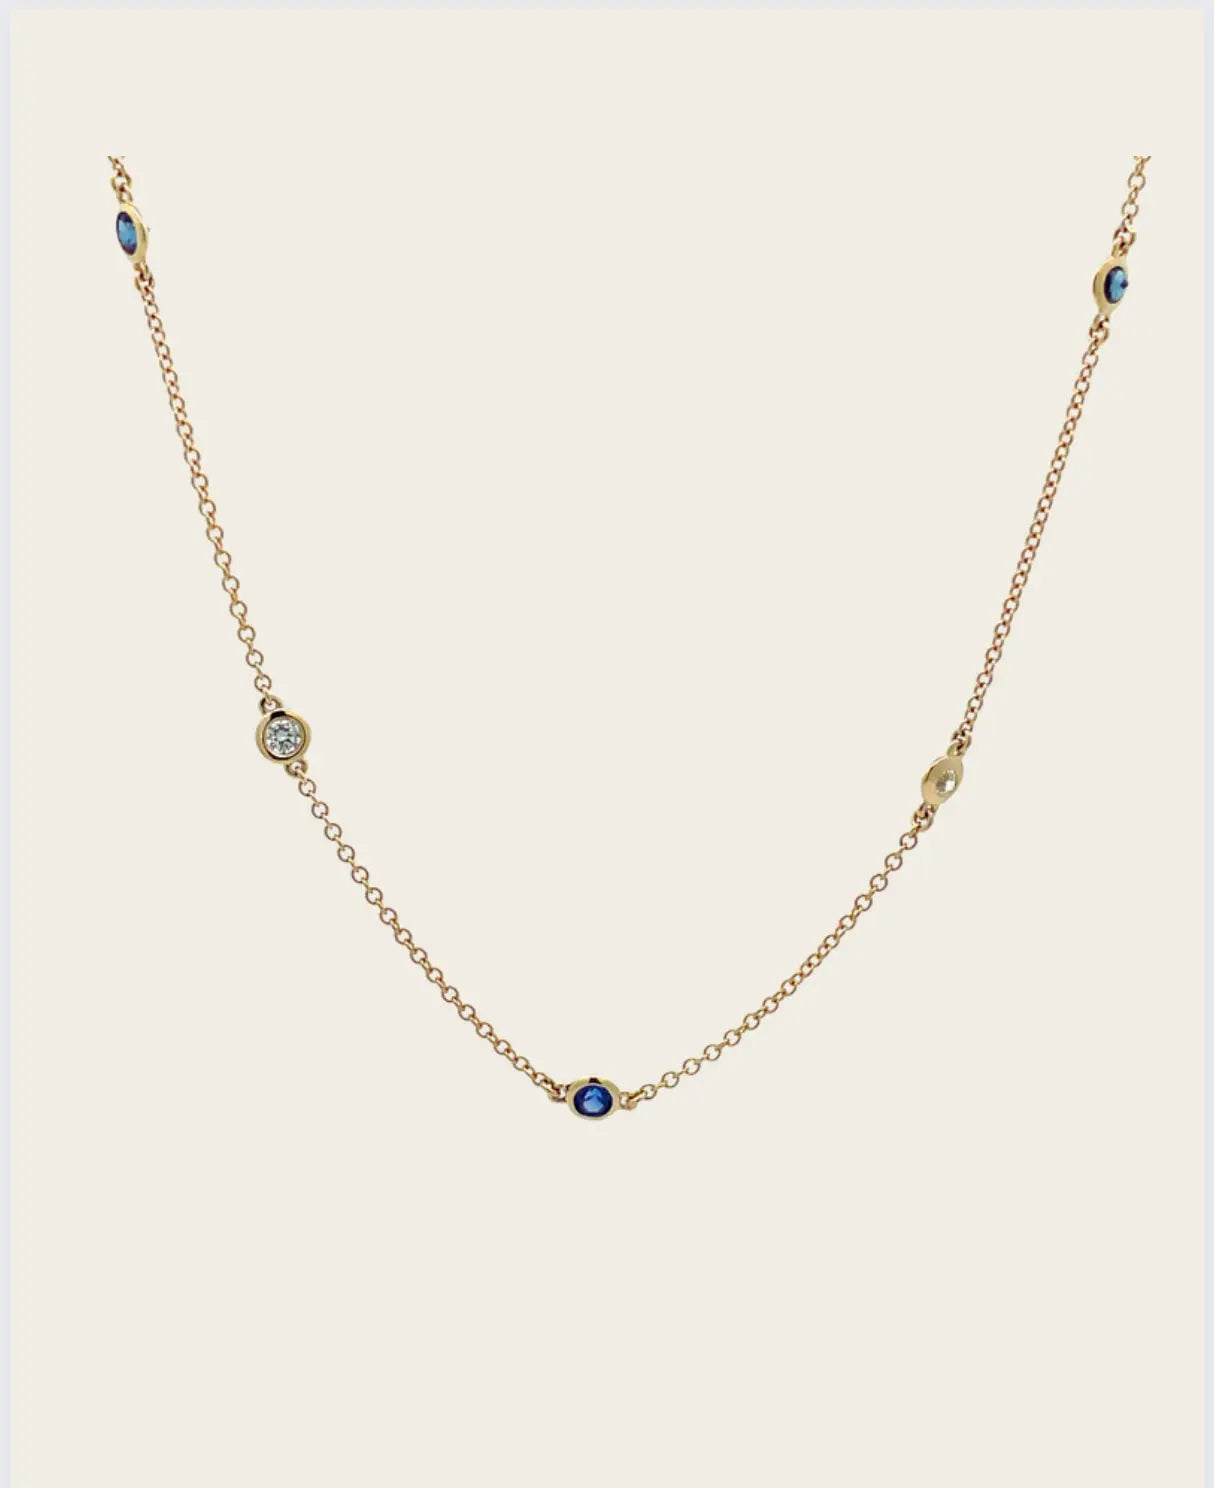 Diamonds & Sapphires by the Yard Necklace Diamonds & Sapphires by the Yard Necklace Squash Blossom Original Squash Blossom Original  Squash Blossom Vail